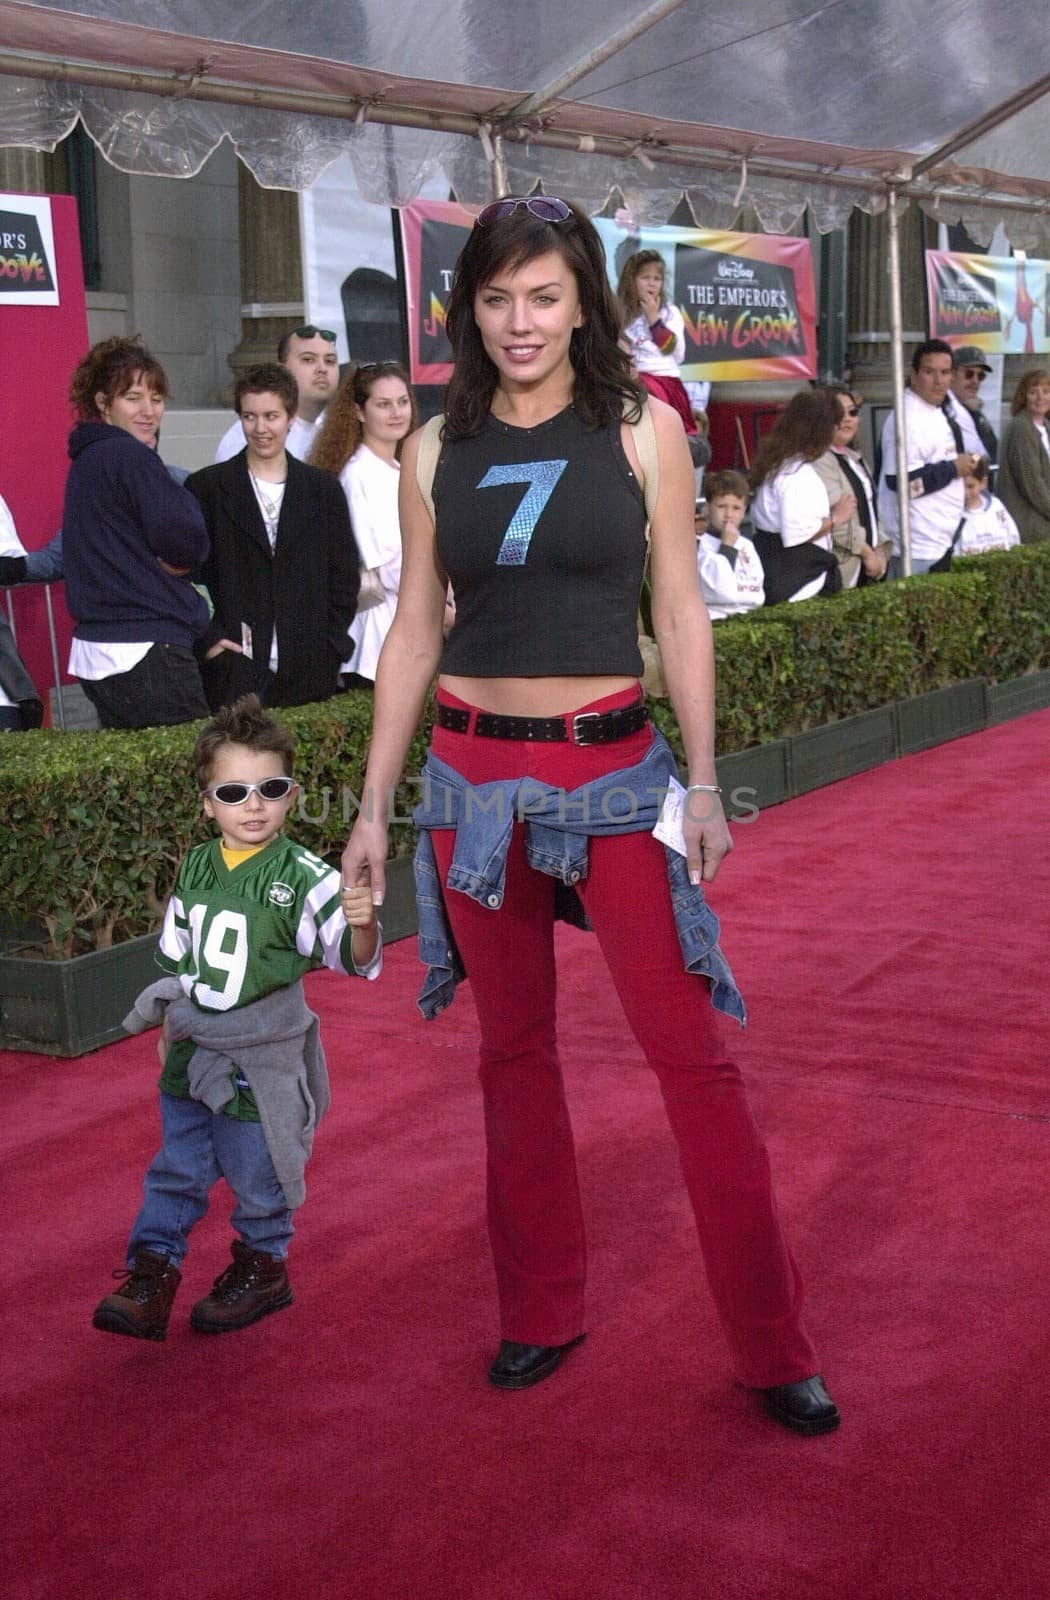 Krista Allen at the premiere of Disney's "The Emperors New Groove" in Hollywood, 12-10-00